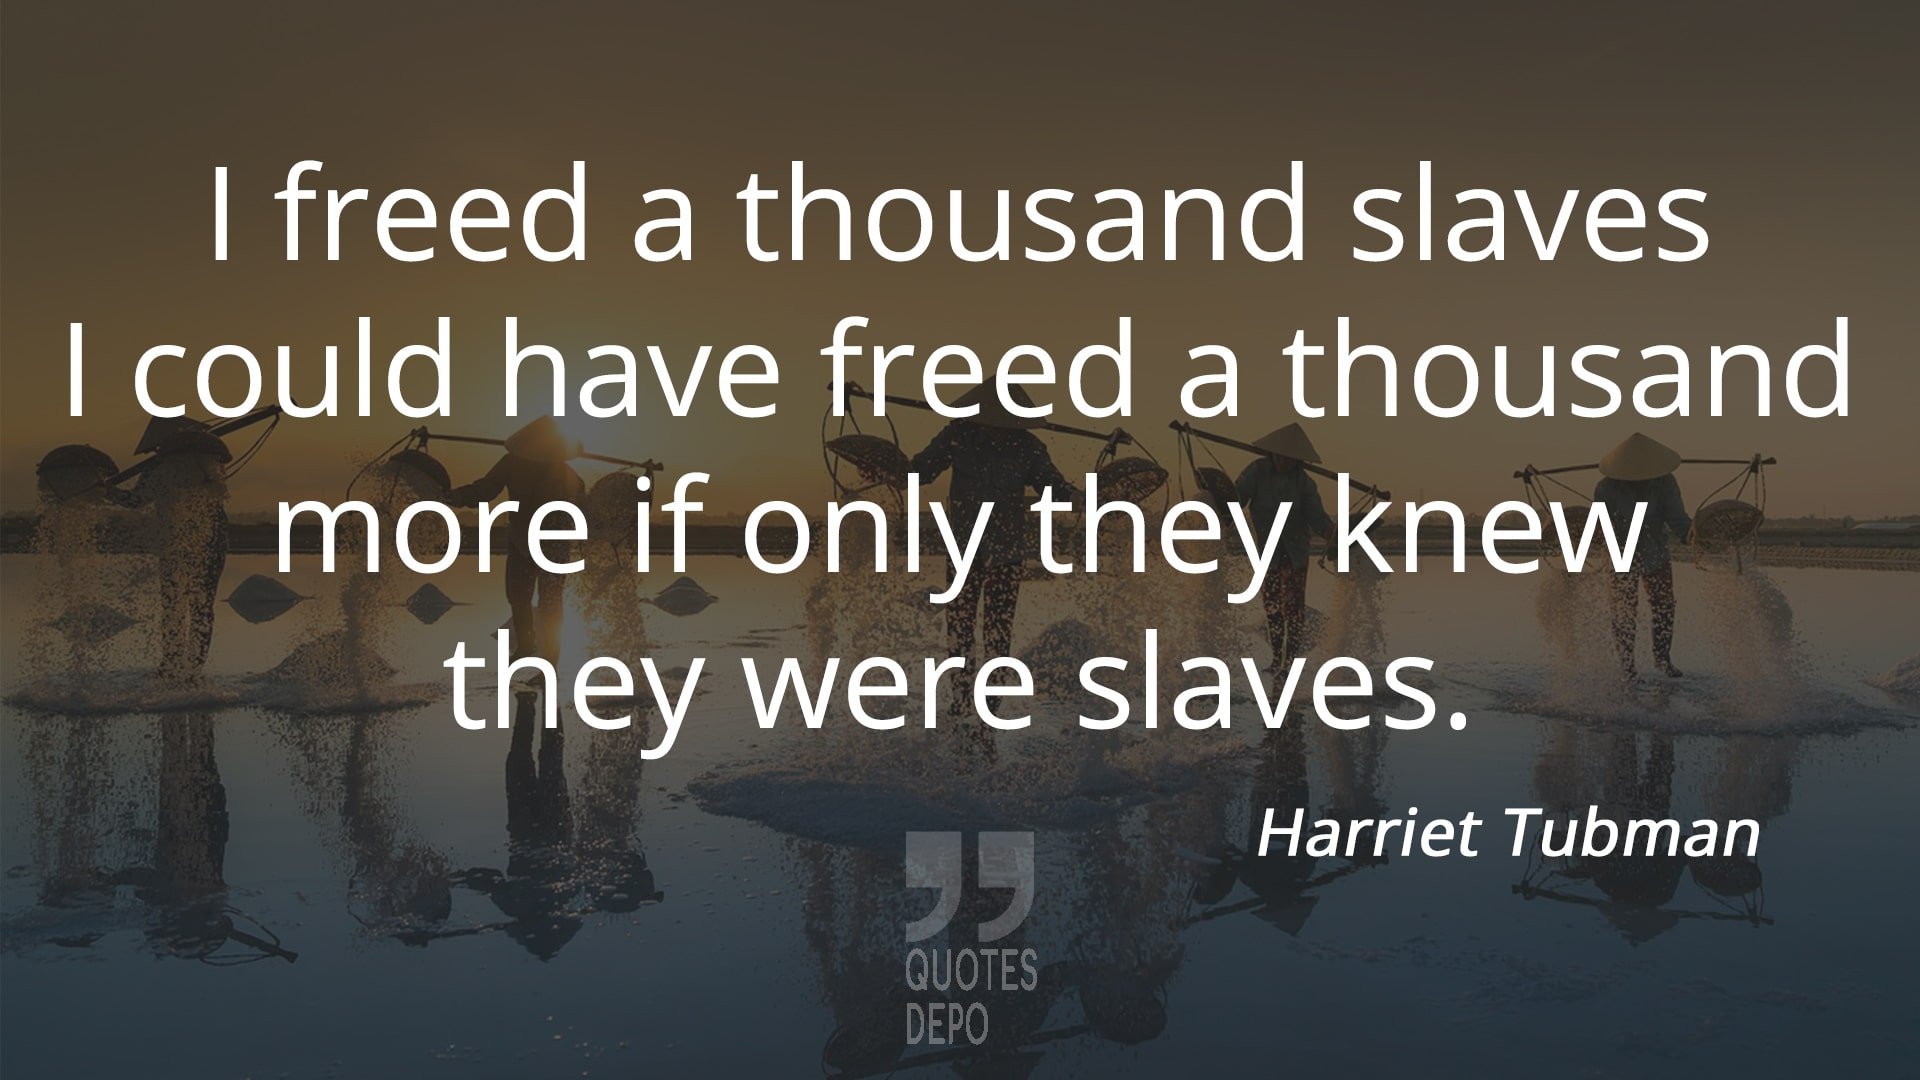 i freed a thousand slaves - harriet tubman quotes